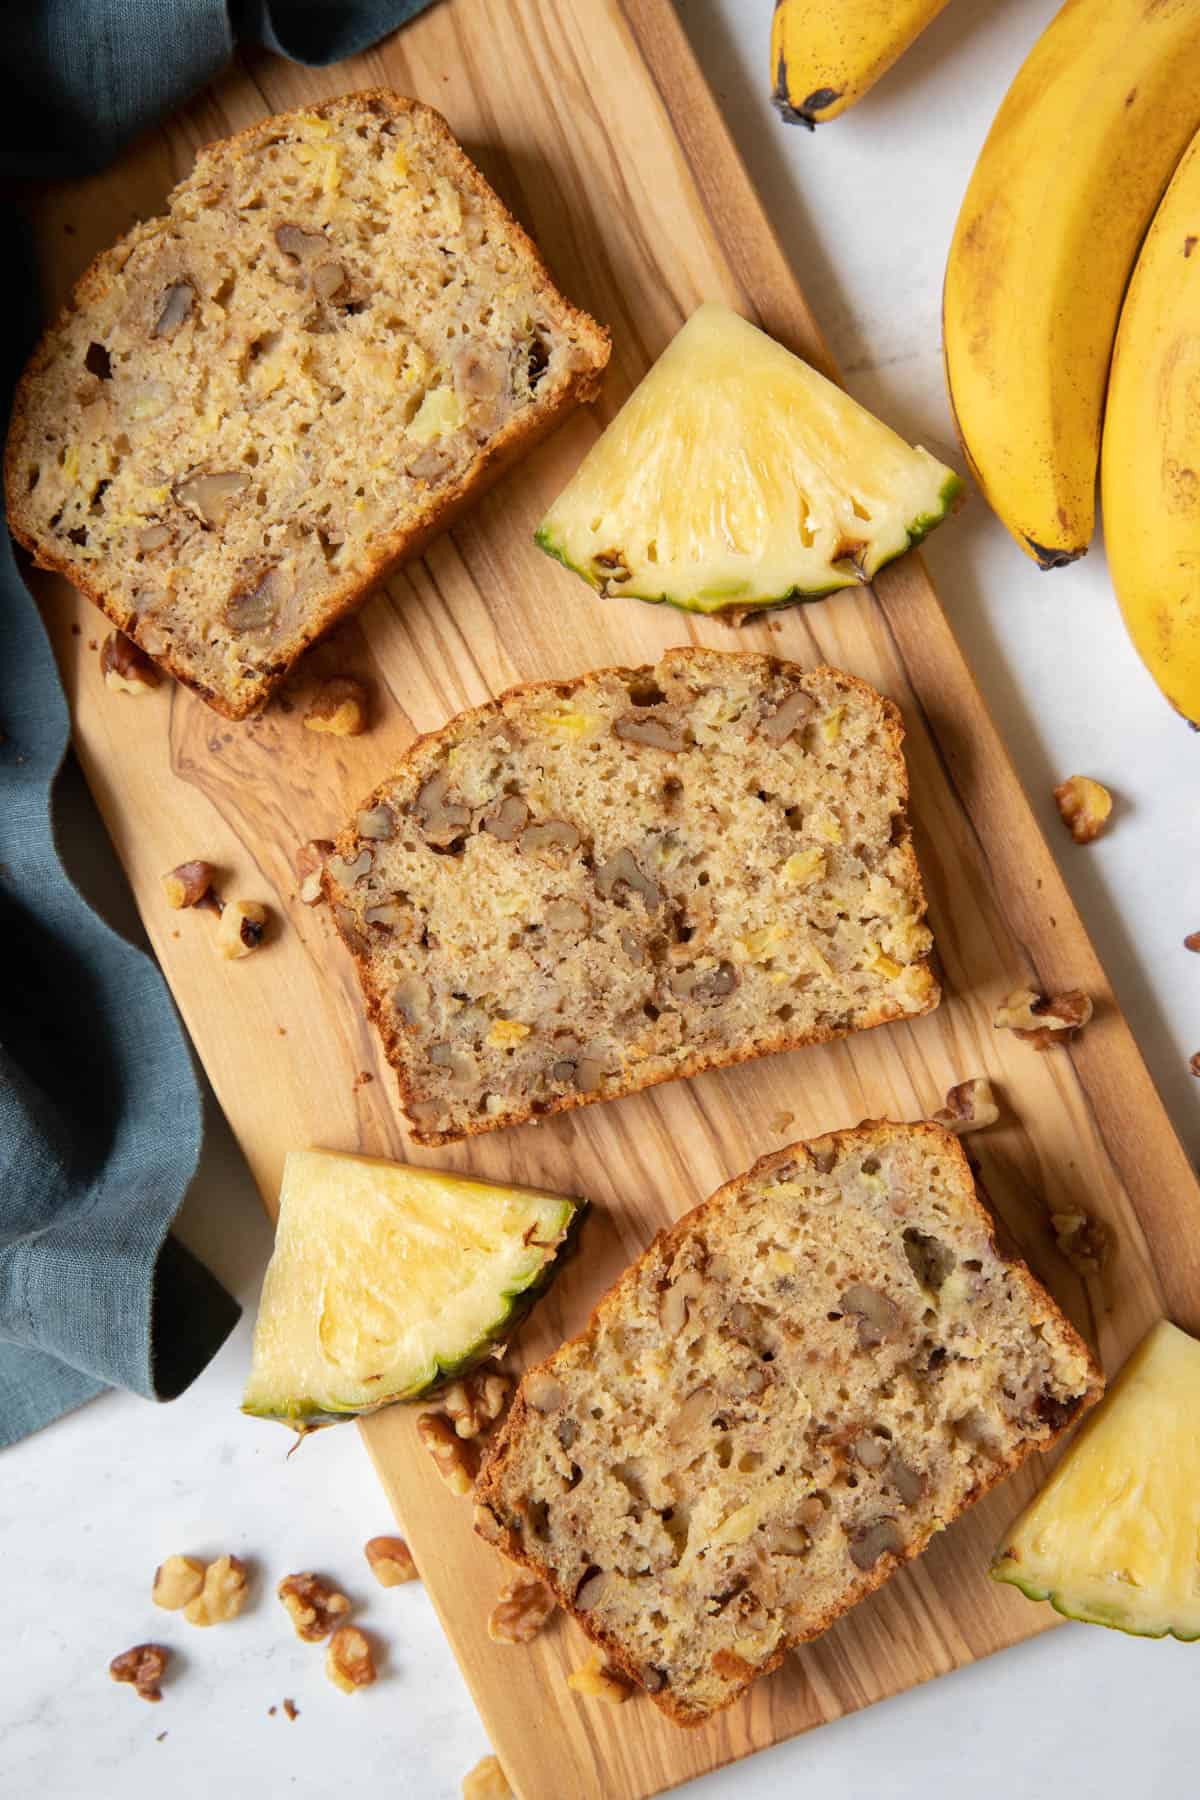 Three slices of pineapple banana bread sitting on a wooden cutting board with slices of fresh pineapple on the side.